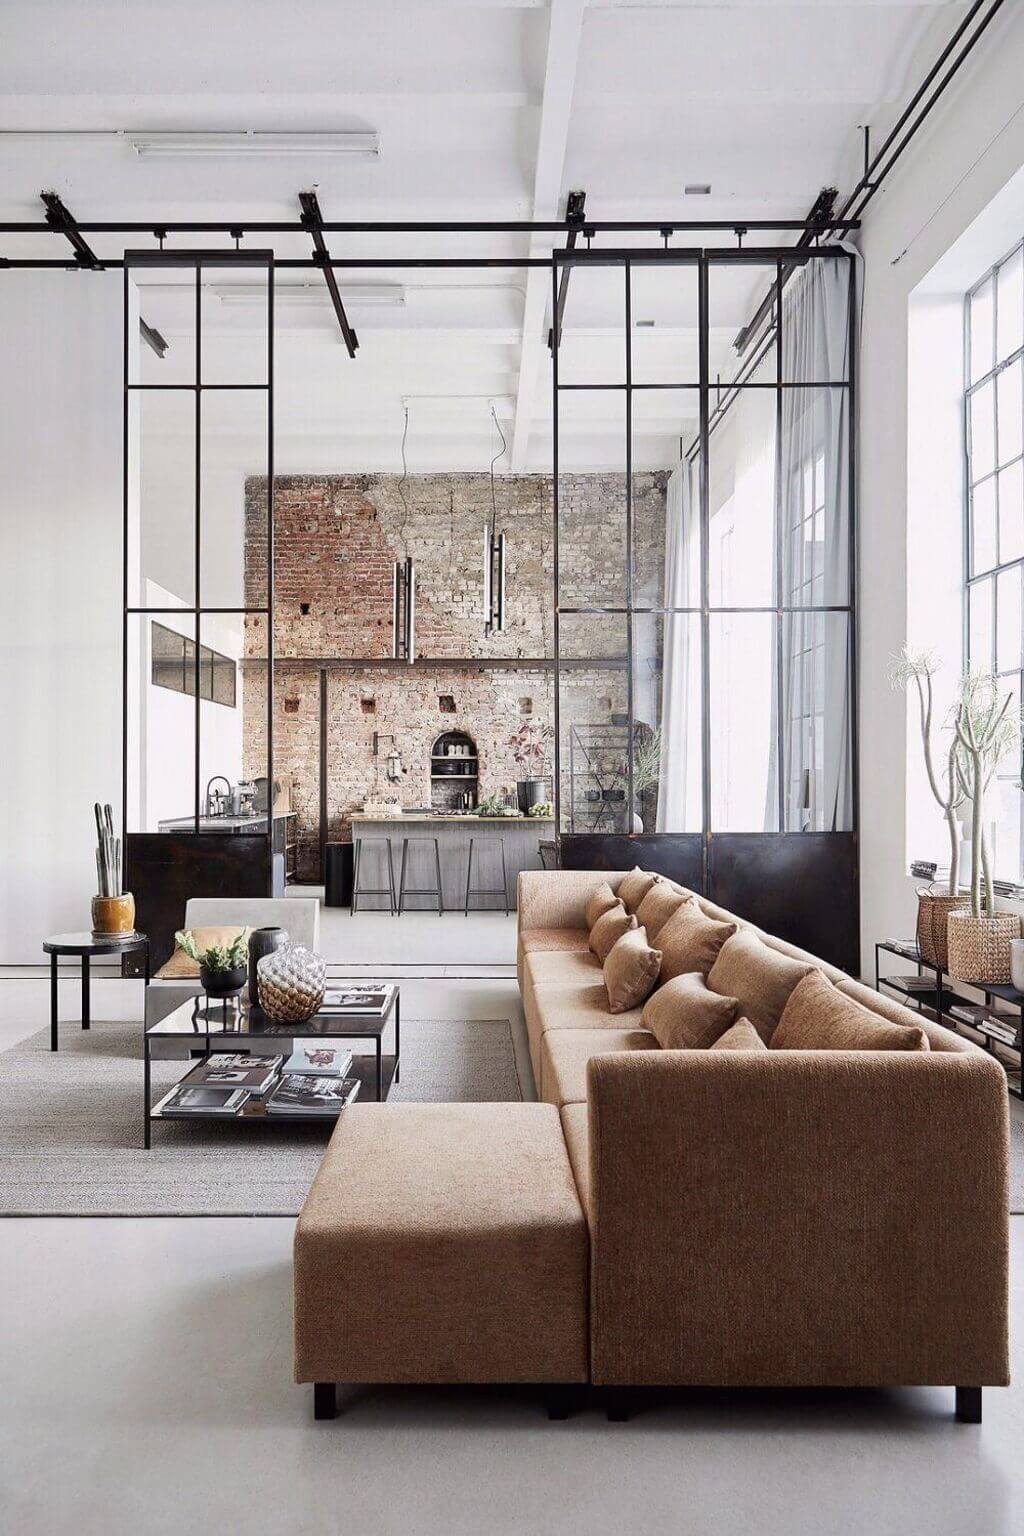 A living room filled with furniture and a brick wall
